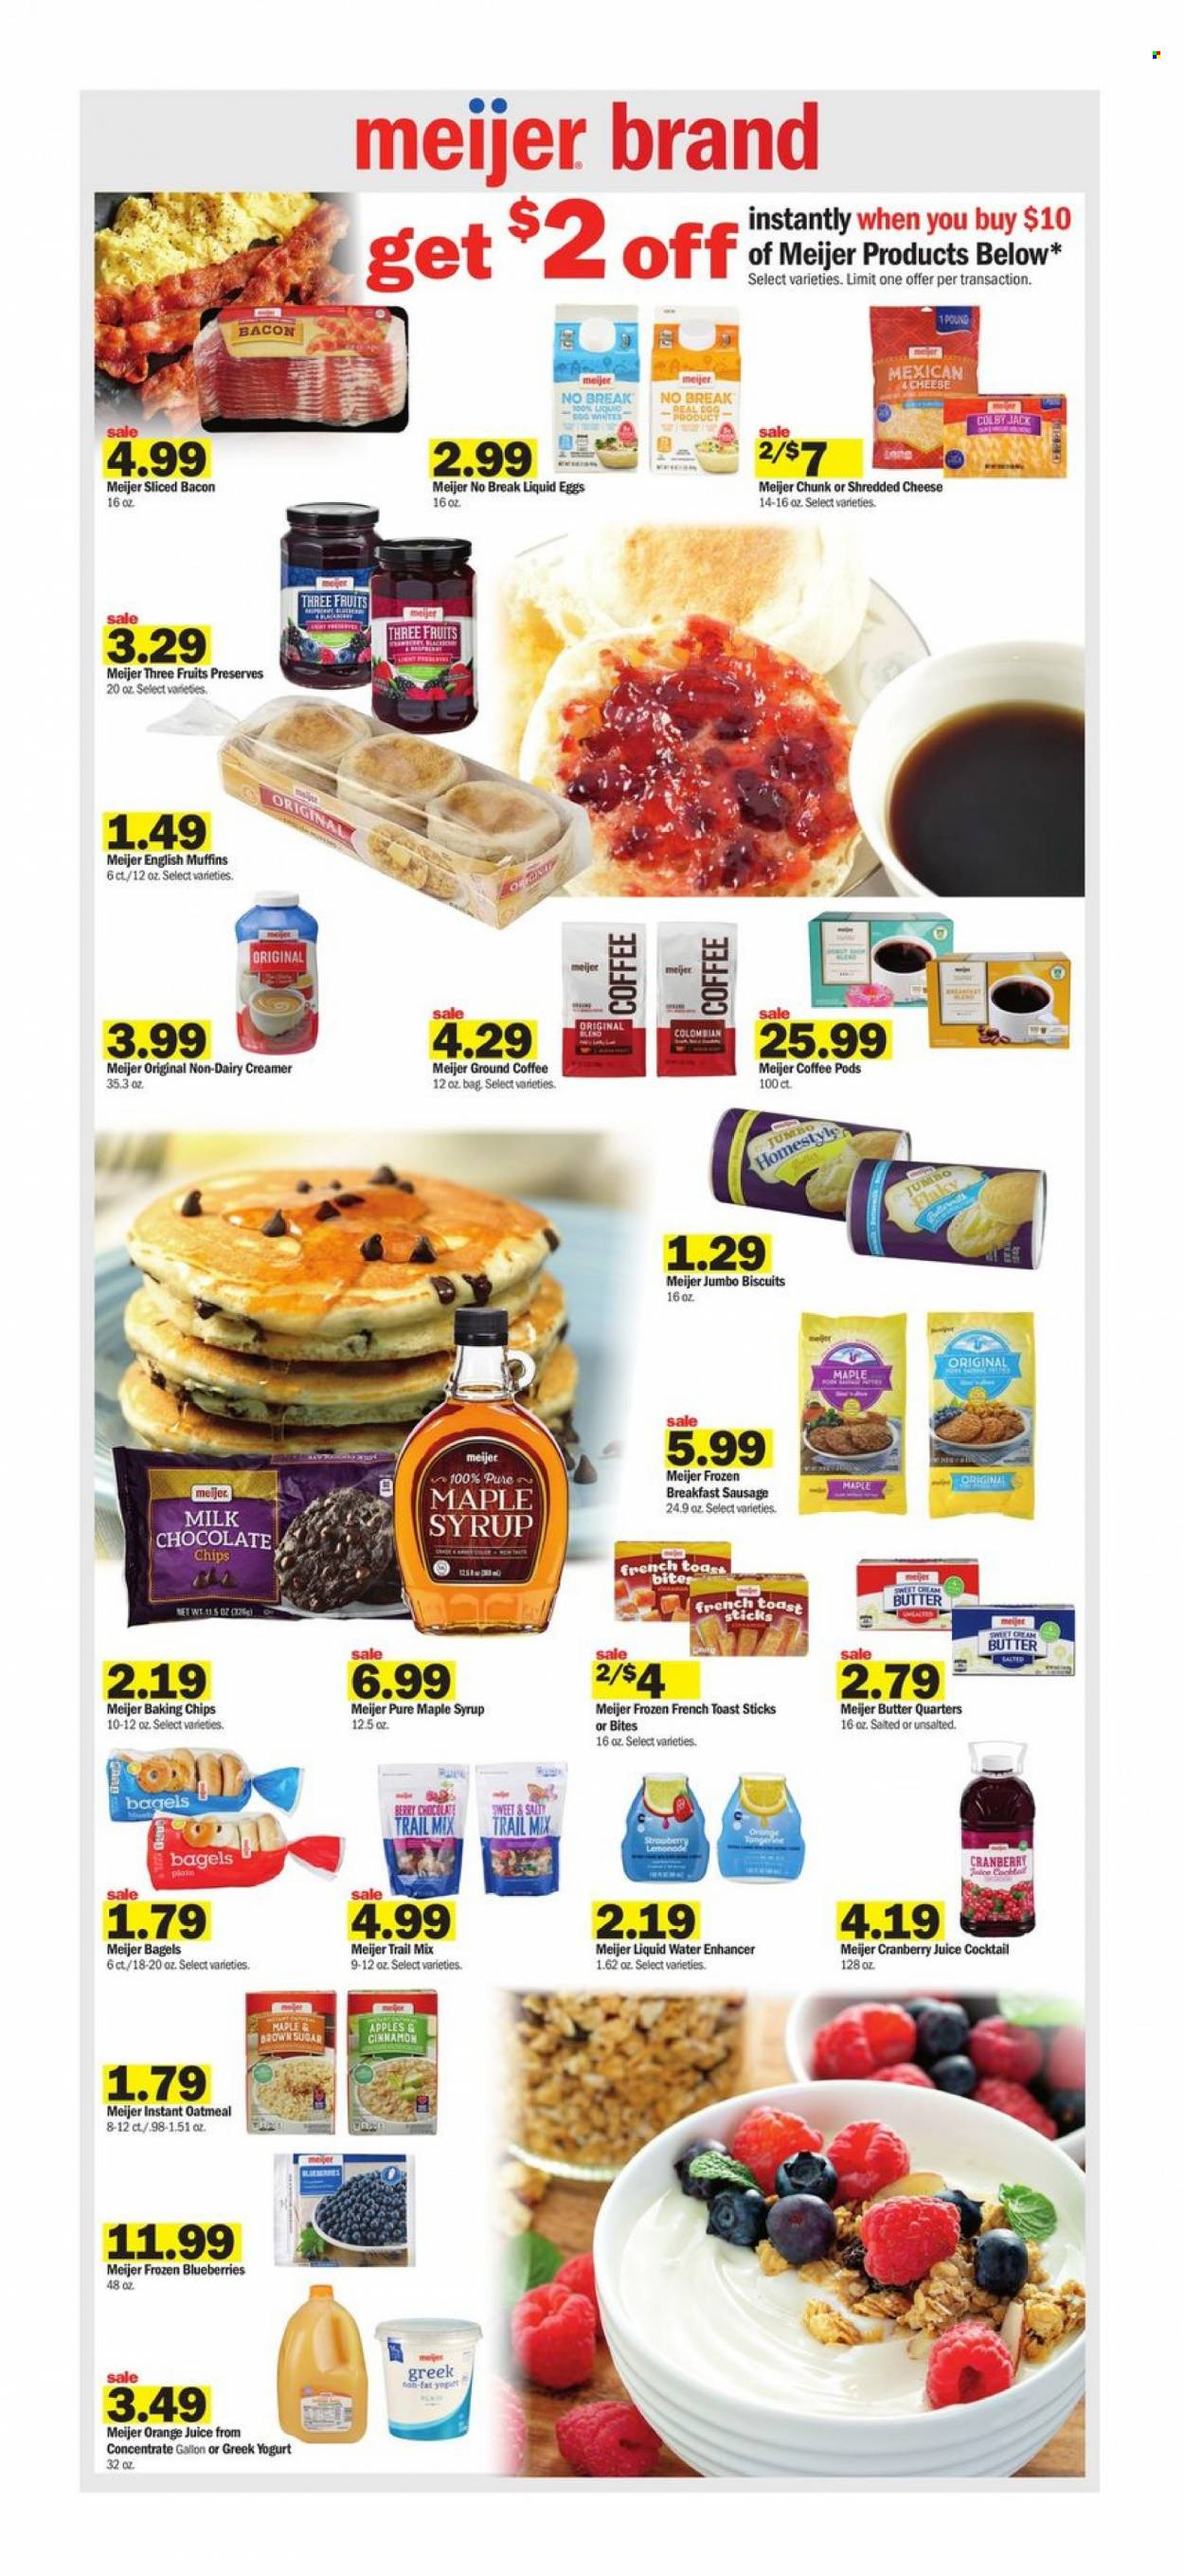 thumbnail - Meijer Flyer - 01/09/2022 - 01/15/2022 - Sales products - bagels, english muffins, apples, blueberries, clams, bacon, sausage, Colby cheese, shredded cheese, greek yoghurt, yoghurt, milk, eggs, butter, non dairy creamer, creamer, chocolate, biscuit, Ego, oatmeal, baking chips, cinnamon, maple syrup, syrup, trail mix, cranberry juice, lemonade, orange juice, juice, coffee pods, ground coffee. Page 10.